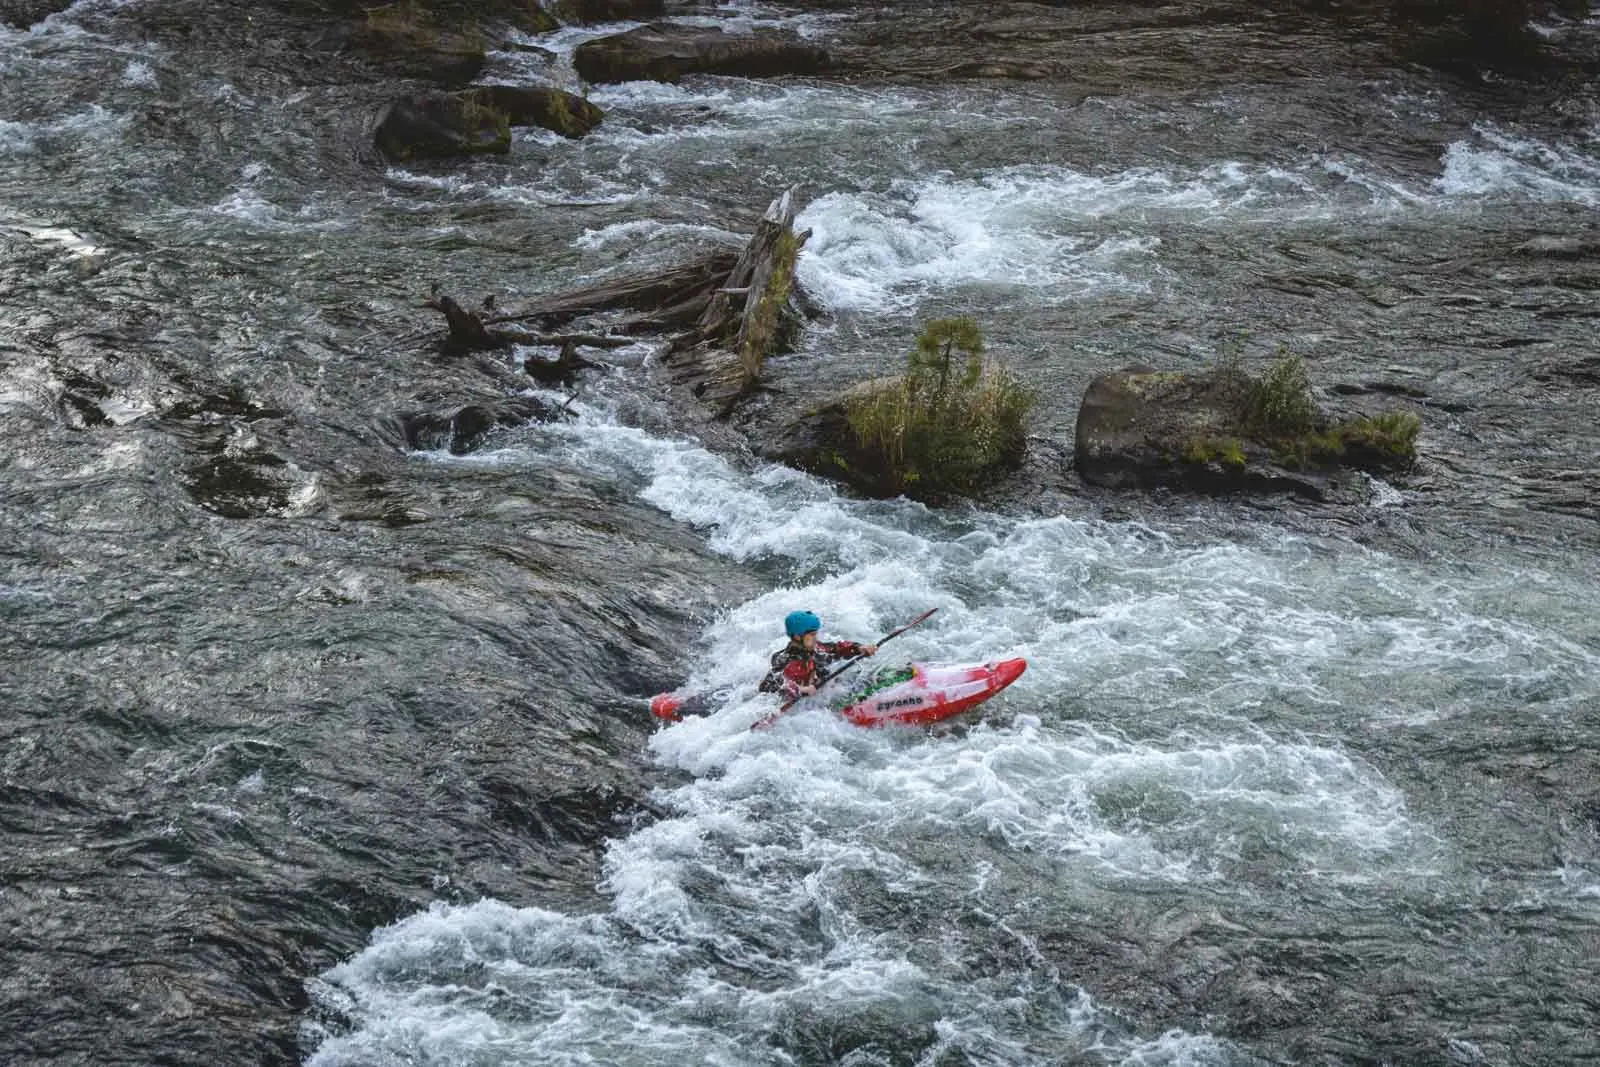 Kayaker on the Deschutes River — just one of the many beautiful things to do in Bend